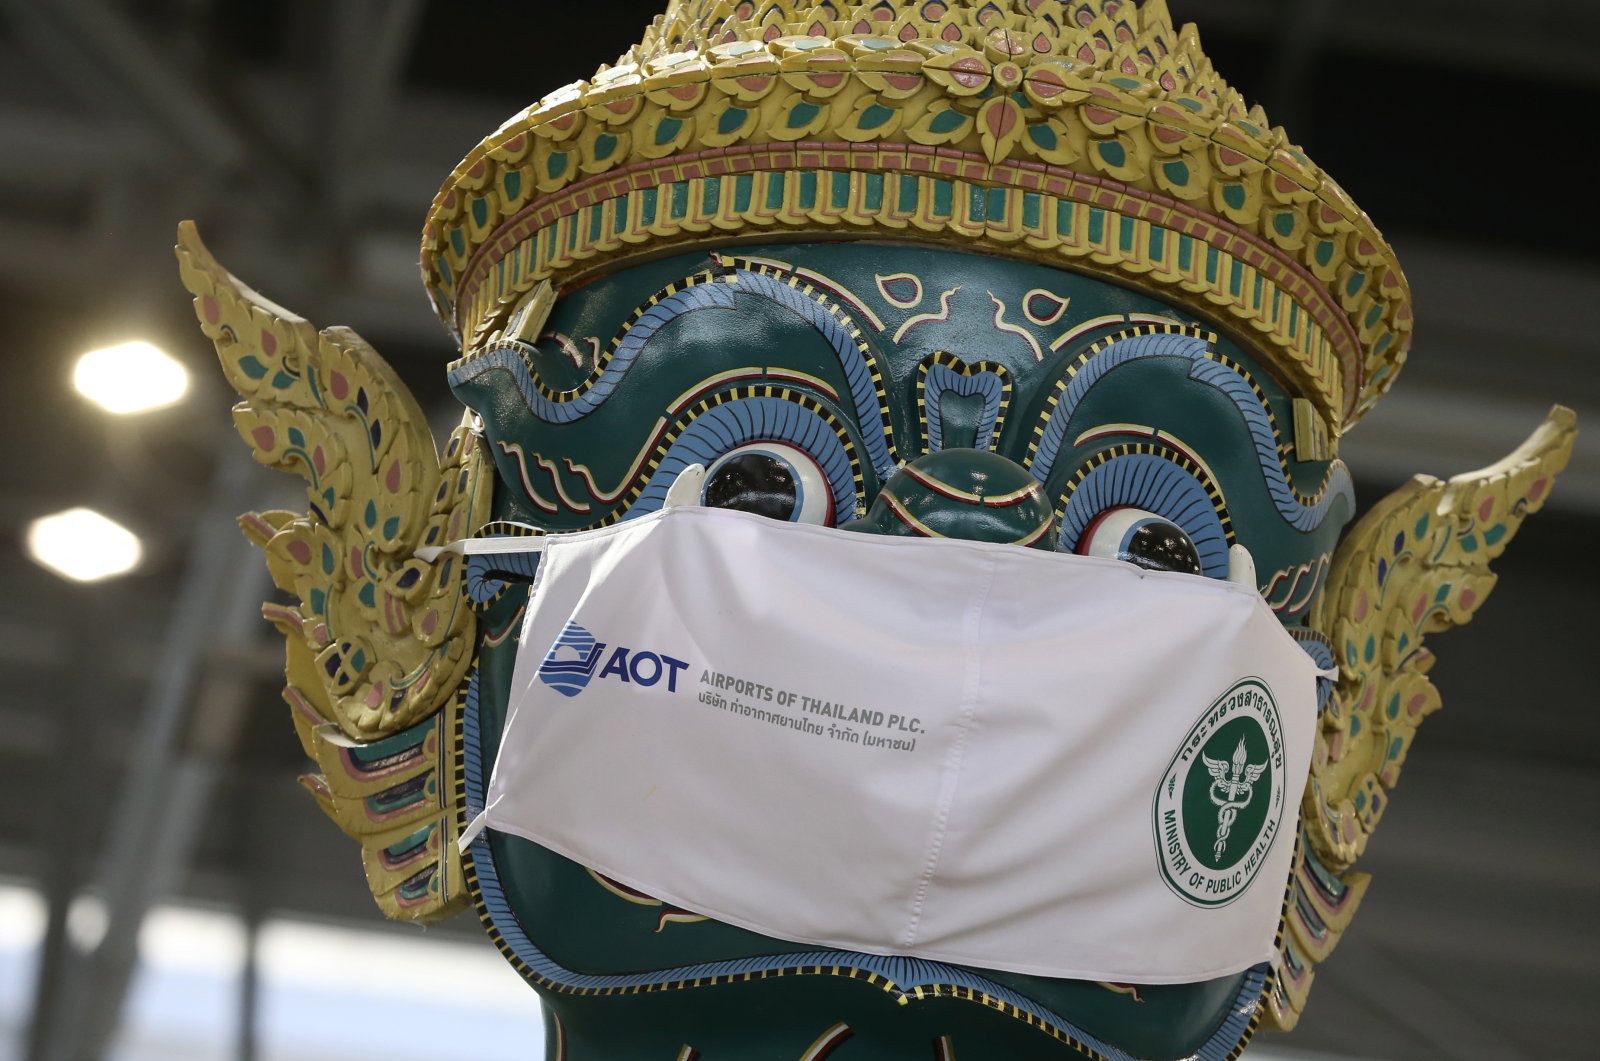 A large Ramayana giant guardian statue wearing a face mask as part of a campaign to prevent the spread of COVID-19 at Suvarnabhumi International Airport in Samut Prakan, Thailand, Dec. 17, 2021. (EPA Photo)